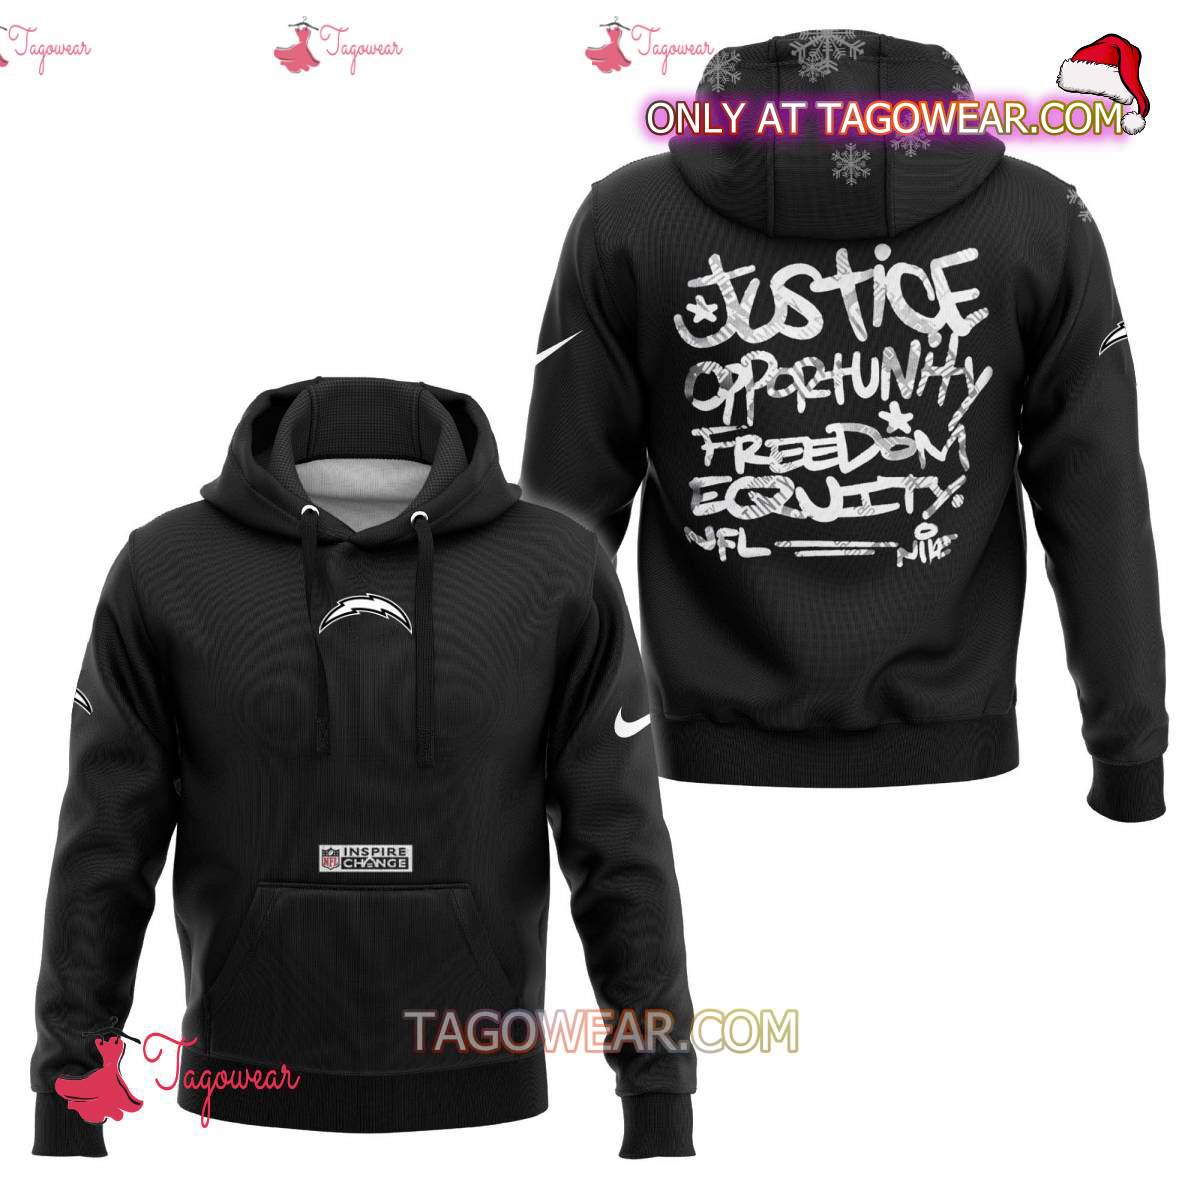 Los Angeles Chargers NFL Inspire Change Justice Opportunity Equality Freedom Hoodie